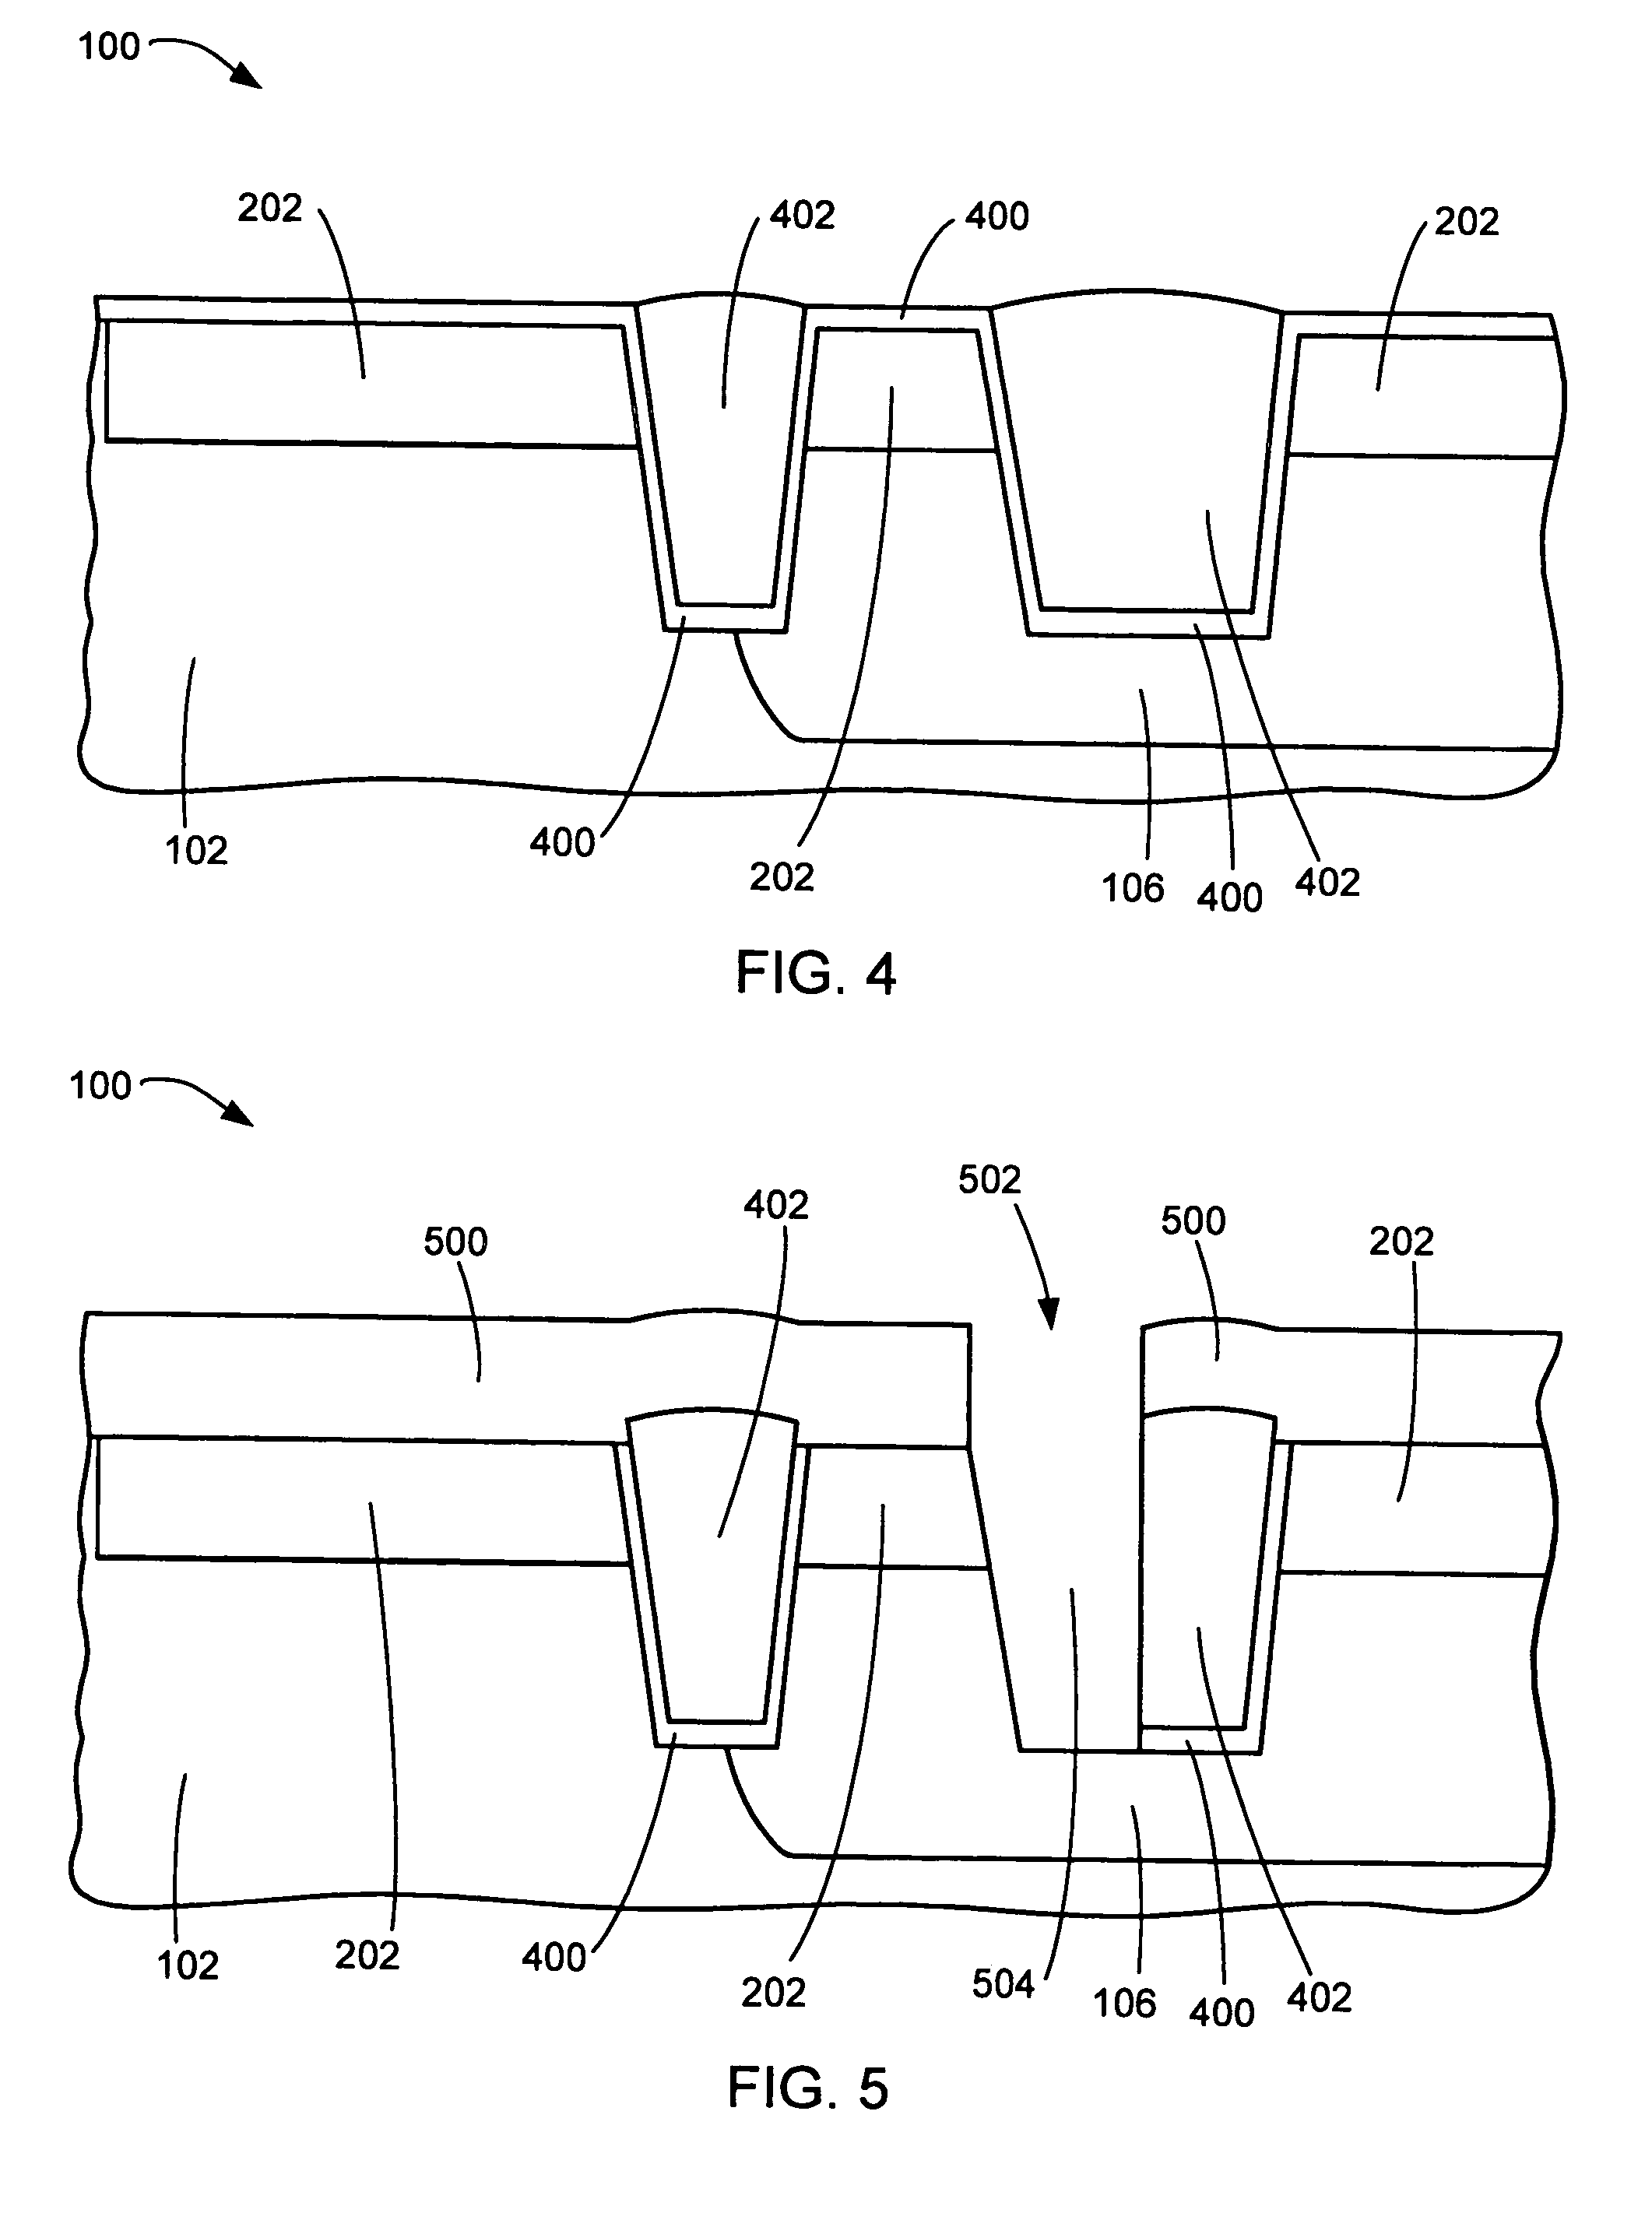 Horizontal TRAM and method for the fabrication thereof